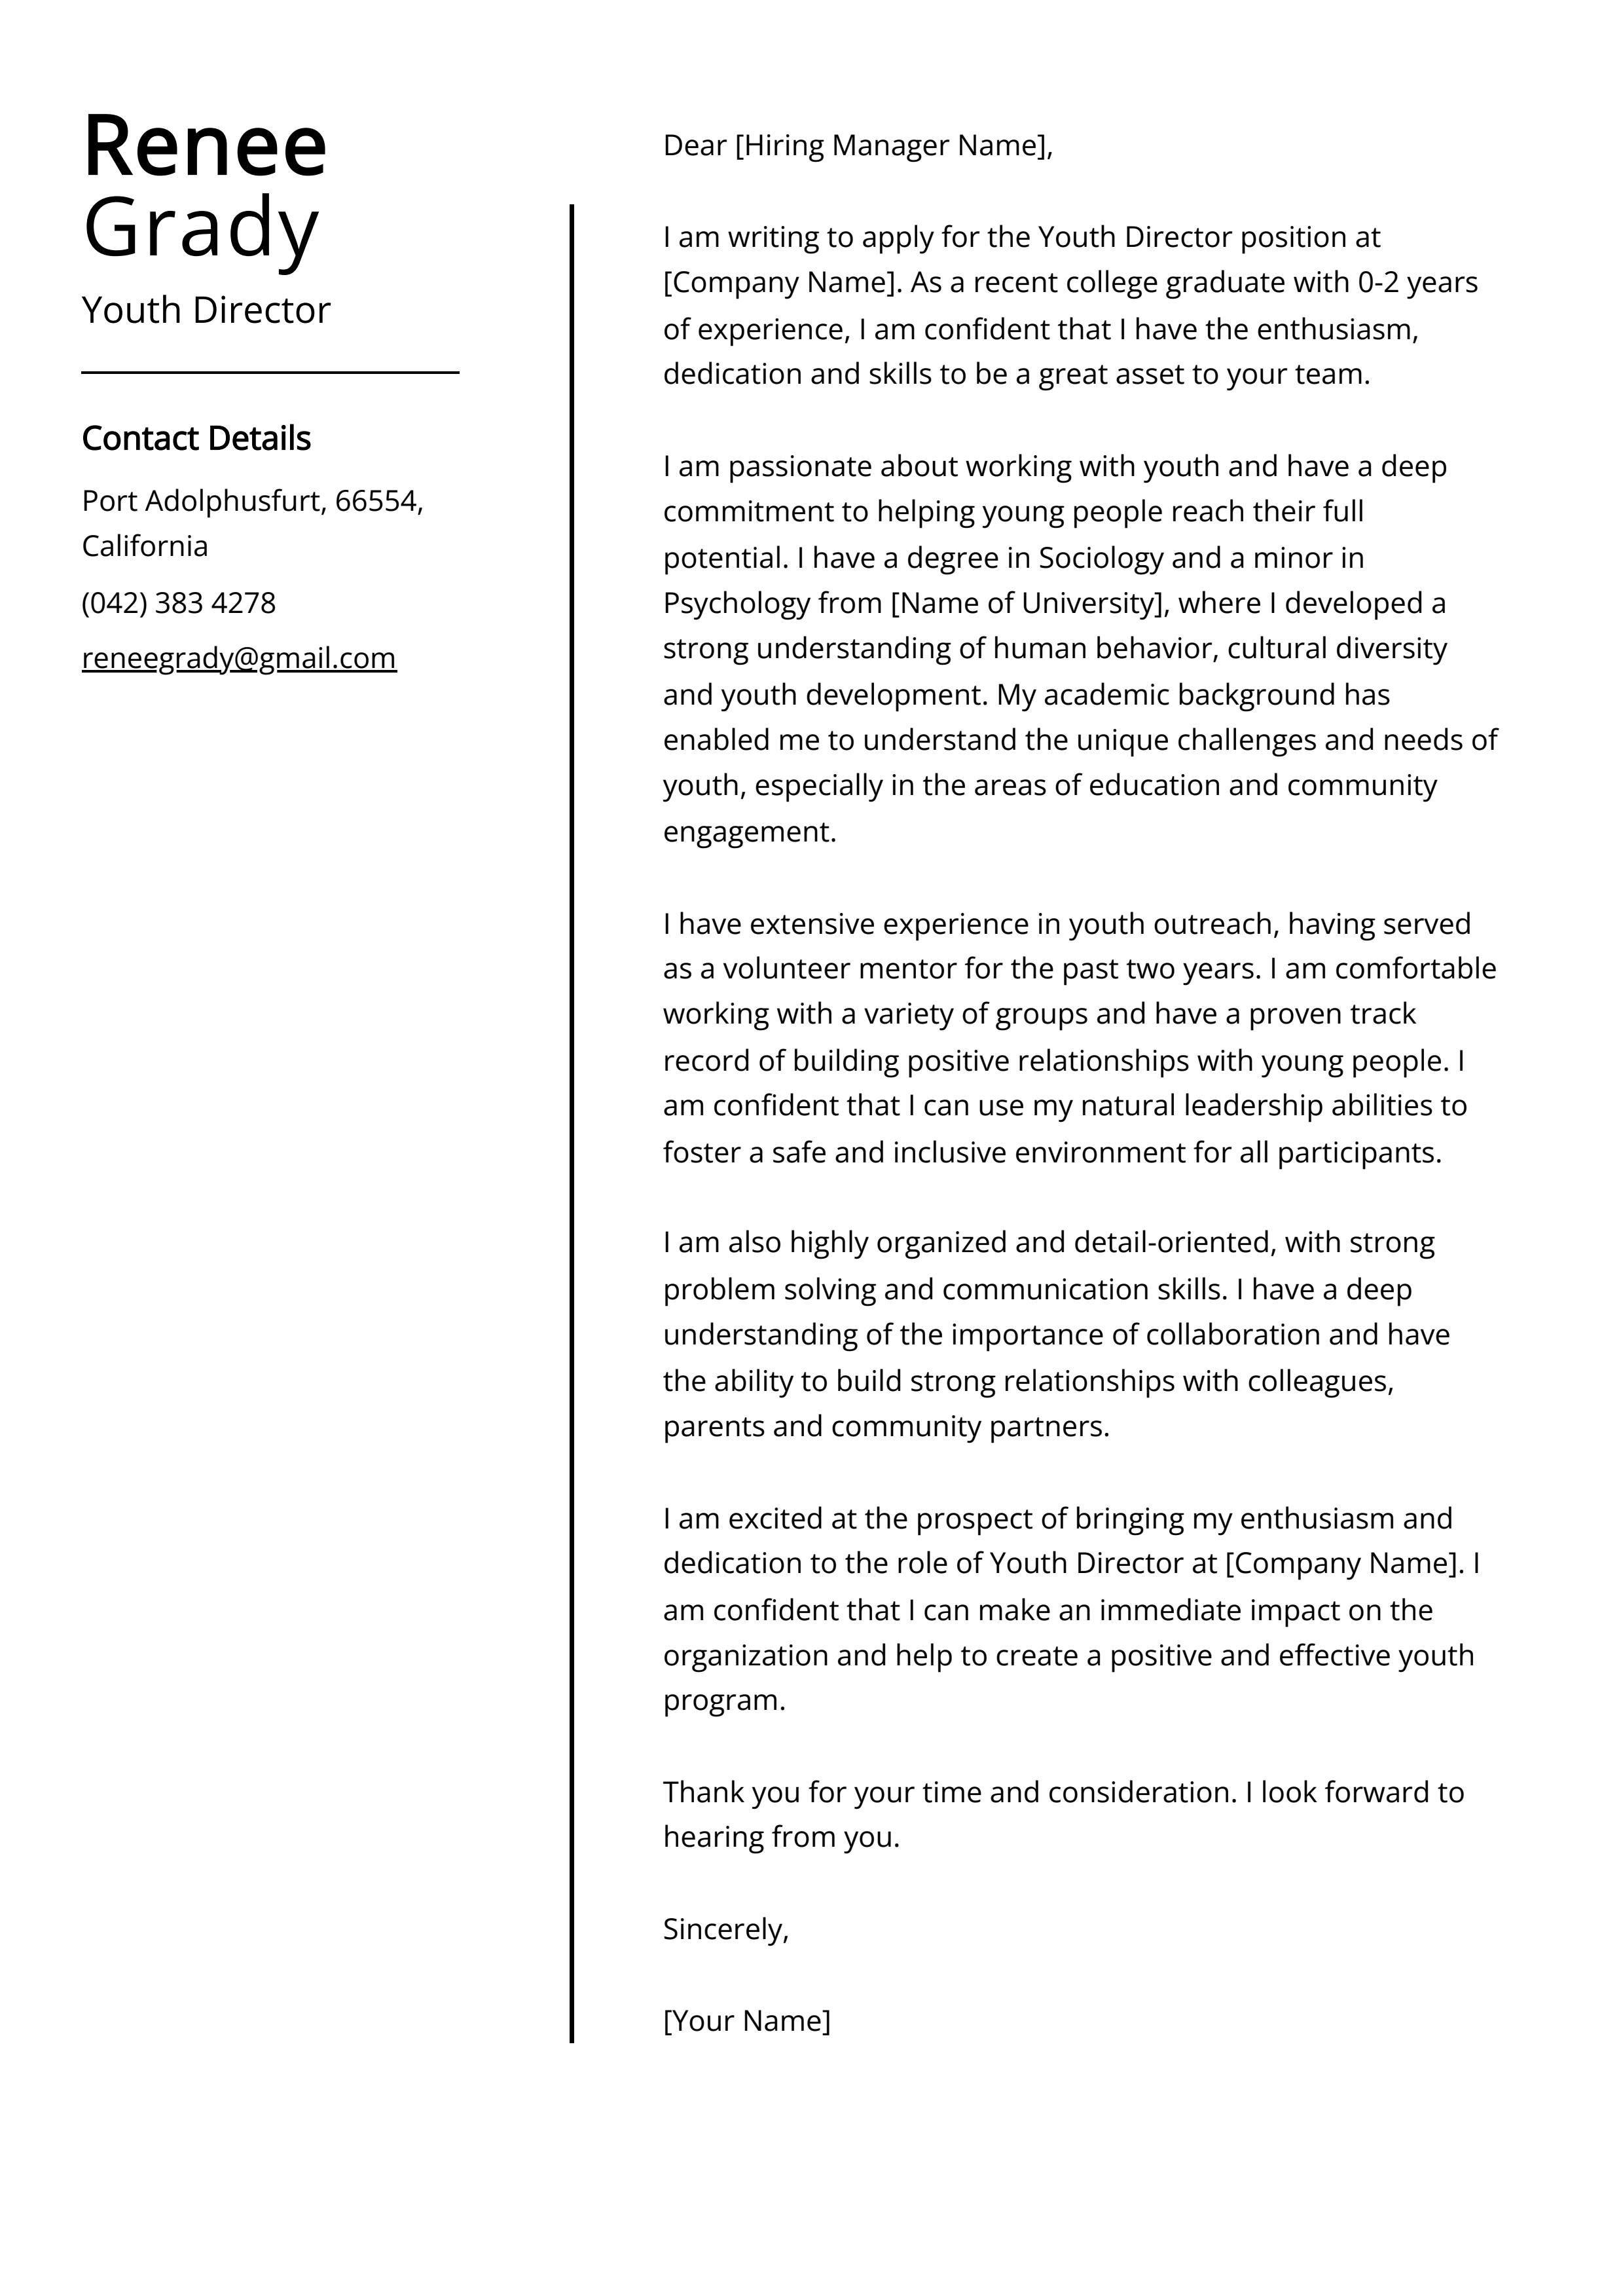 Youth Director Cover Letter Example